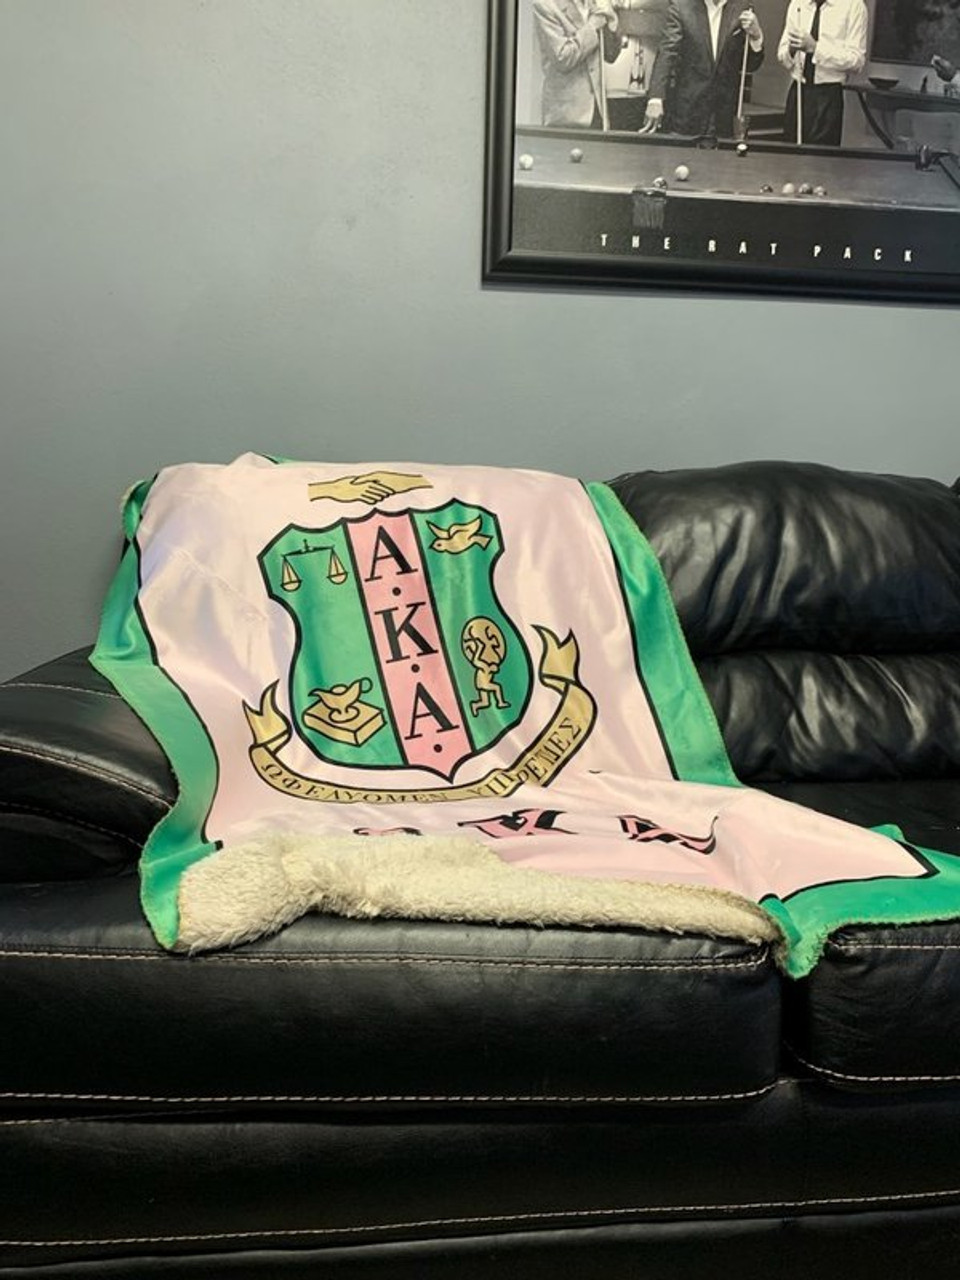 Sorority Crest Blankets, like this AKA one, make a cozy new apartment gift for graduating seniors embarking on their new adult lives.